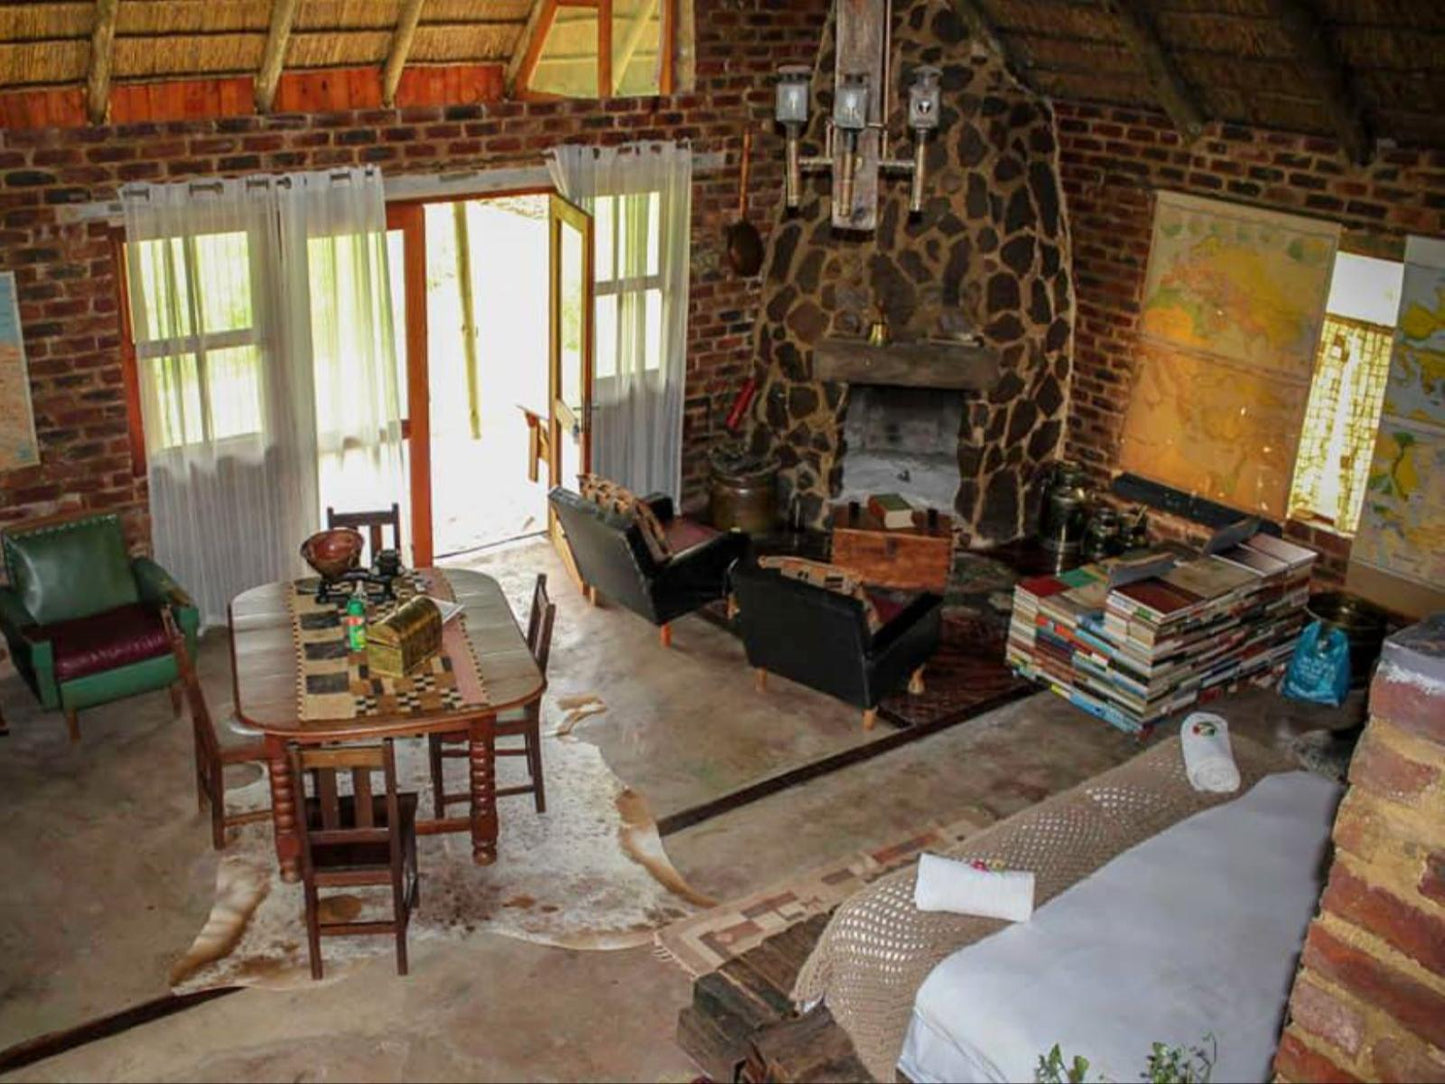 2 Bedroom Cottage - Sumer @ The Ancient Copper Shed